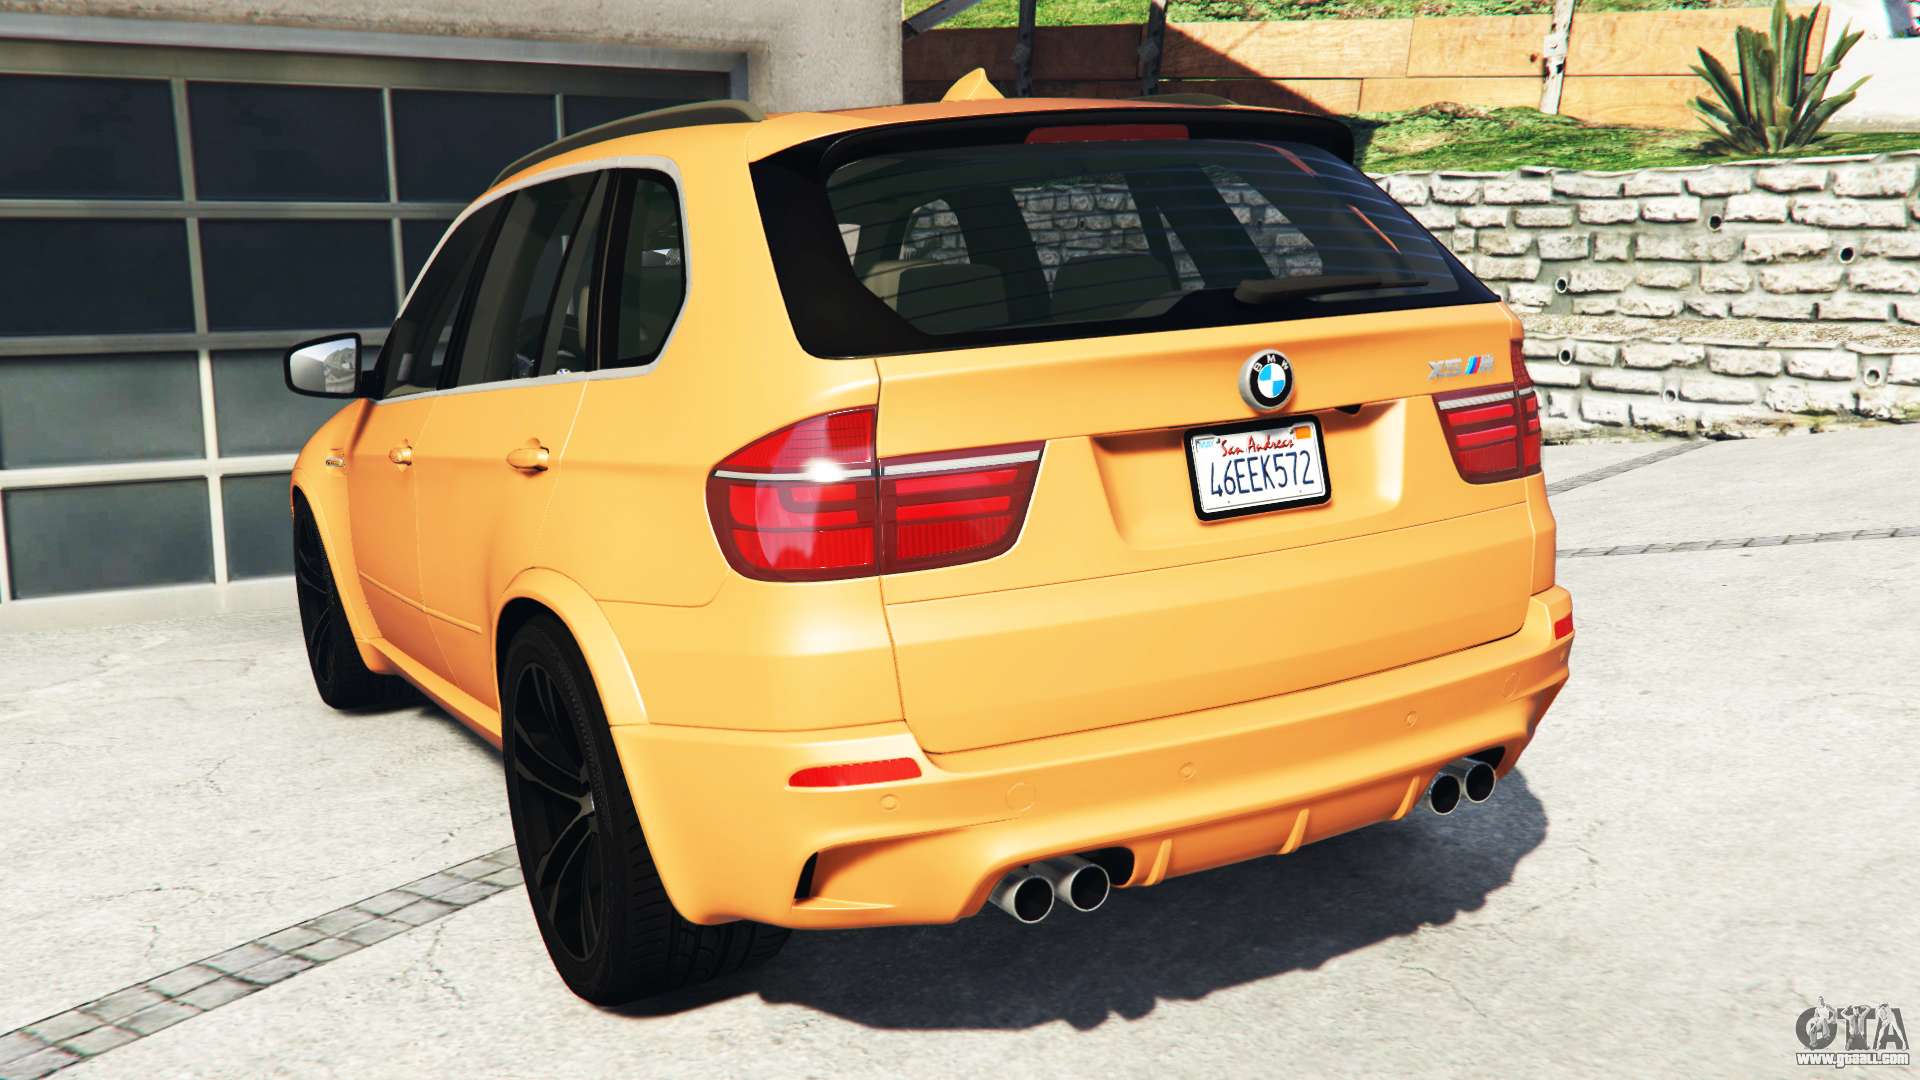 BMW X5 M (E70) 2013 v1.0 add-on for GTA 5